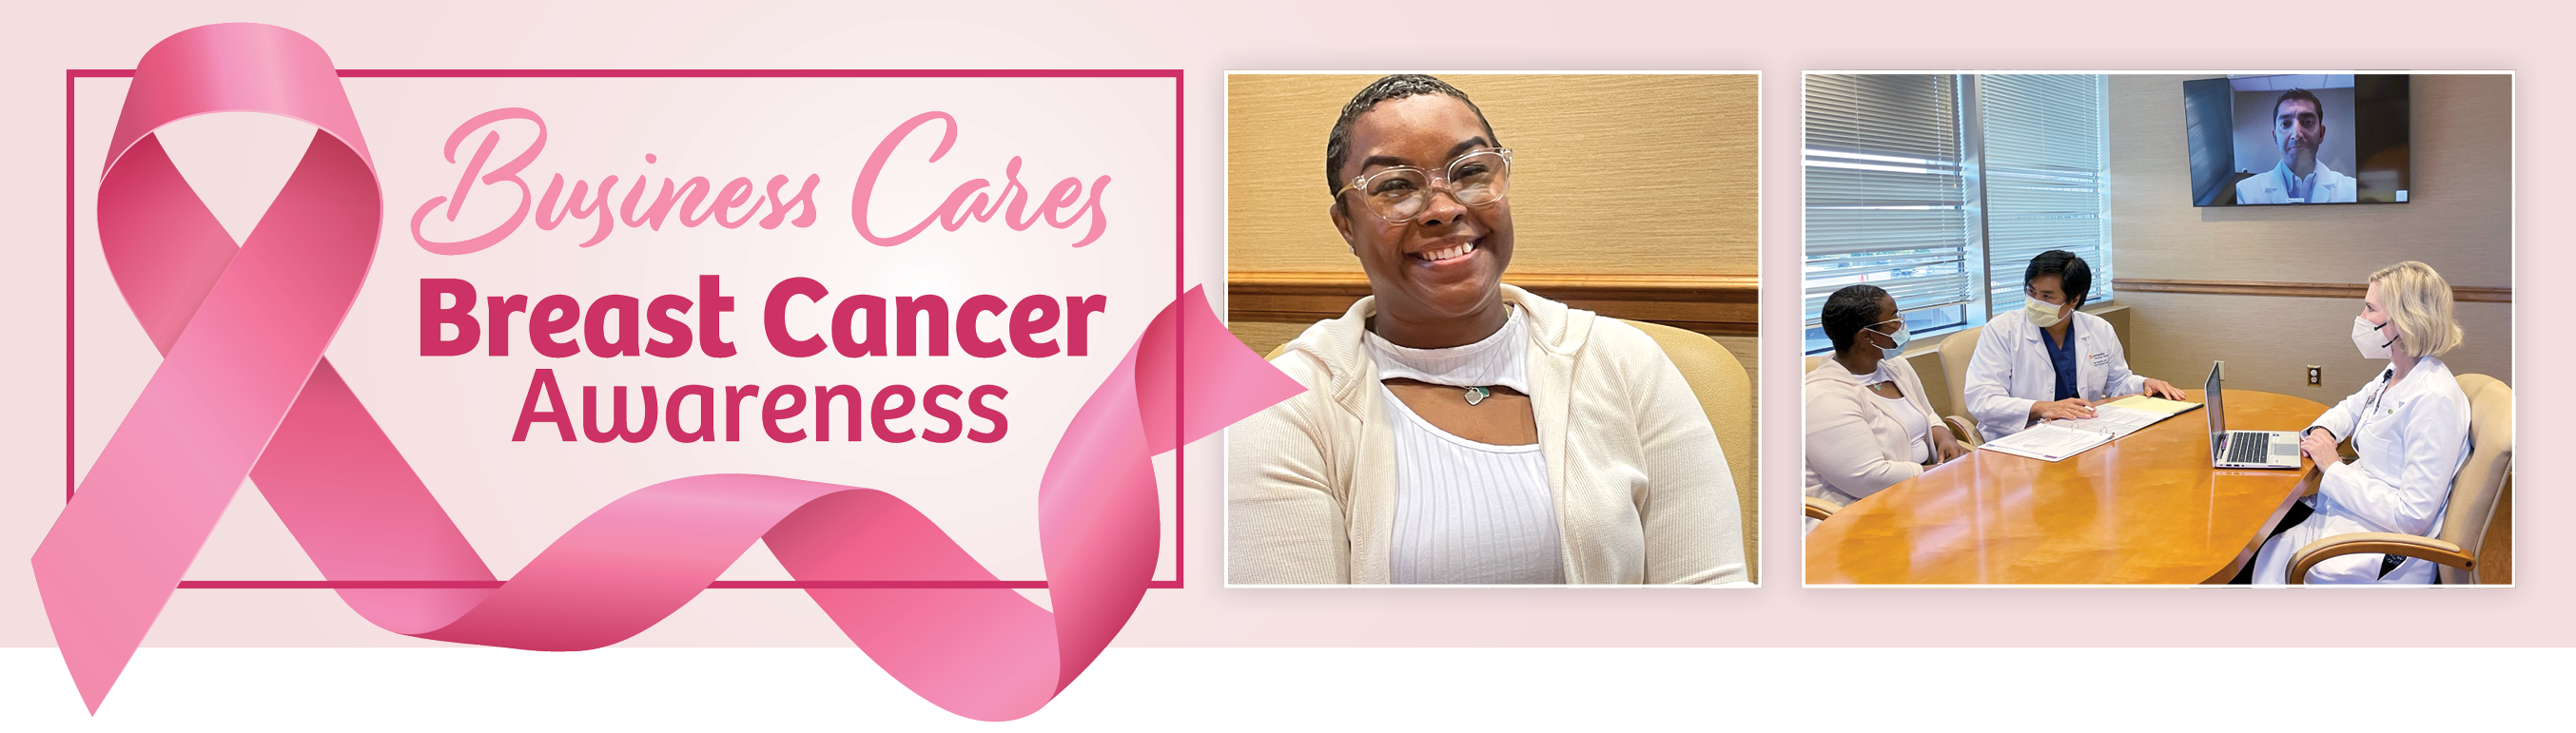 Business Cares: Breast Cancer Awareness 2022 – Indianapolis Business Journal